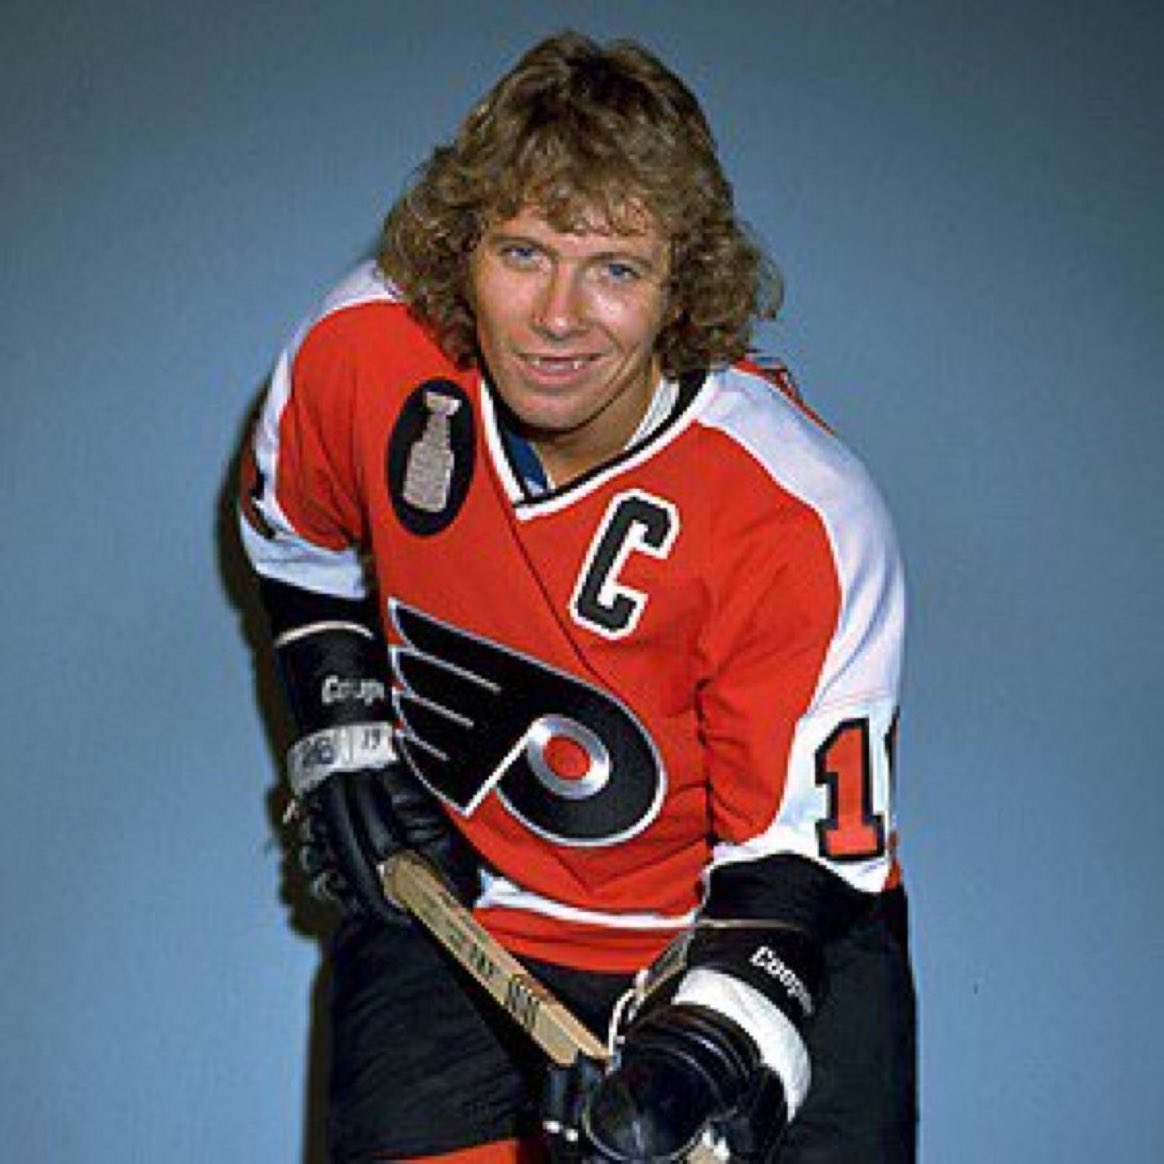 Bobby Clarke captained the Flyers to Stanley Cups in 1974 and 1975 while looking like the prettiest girl in West Virginia.